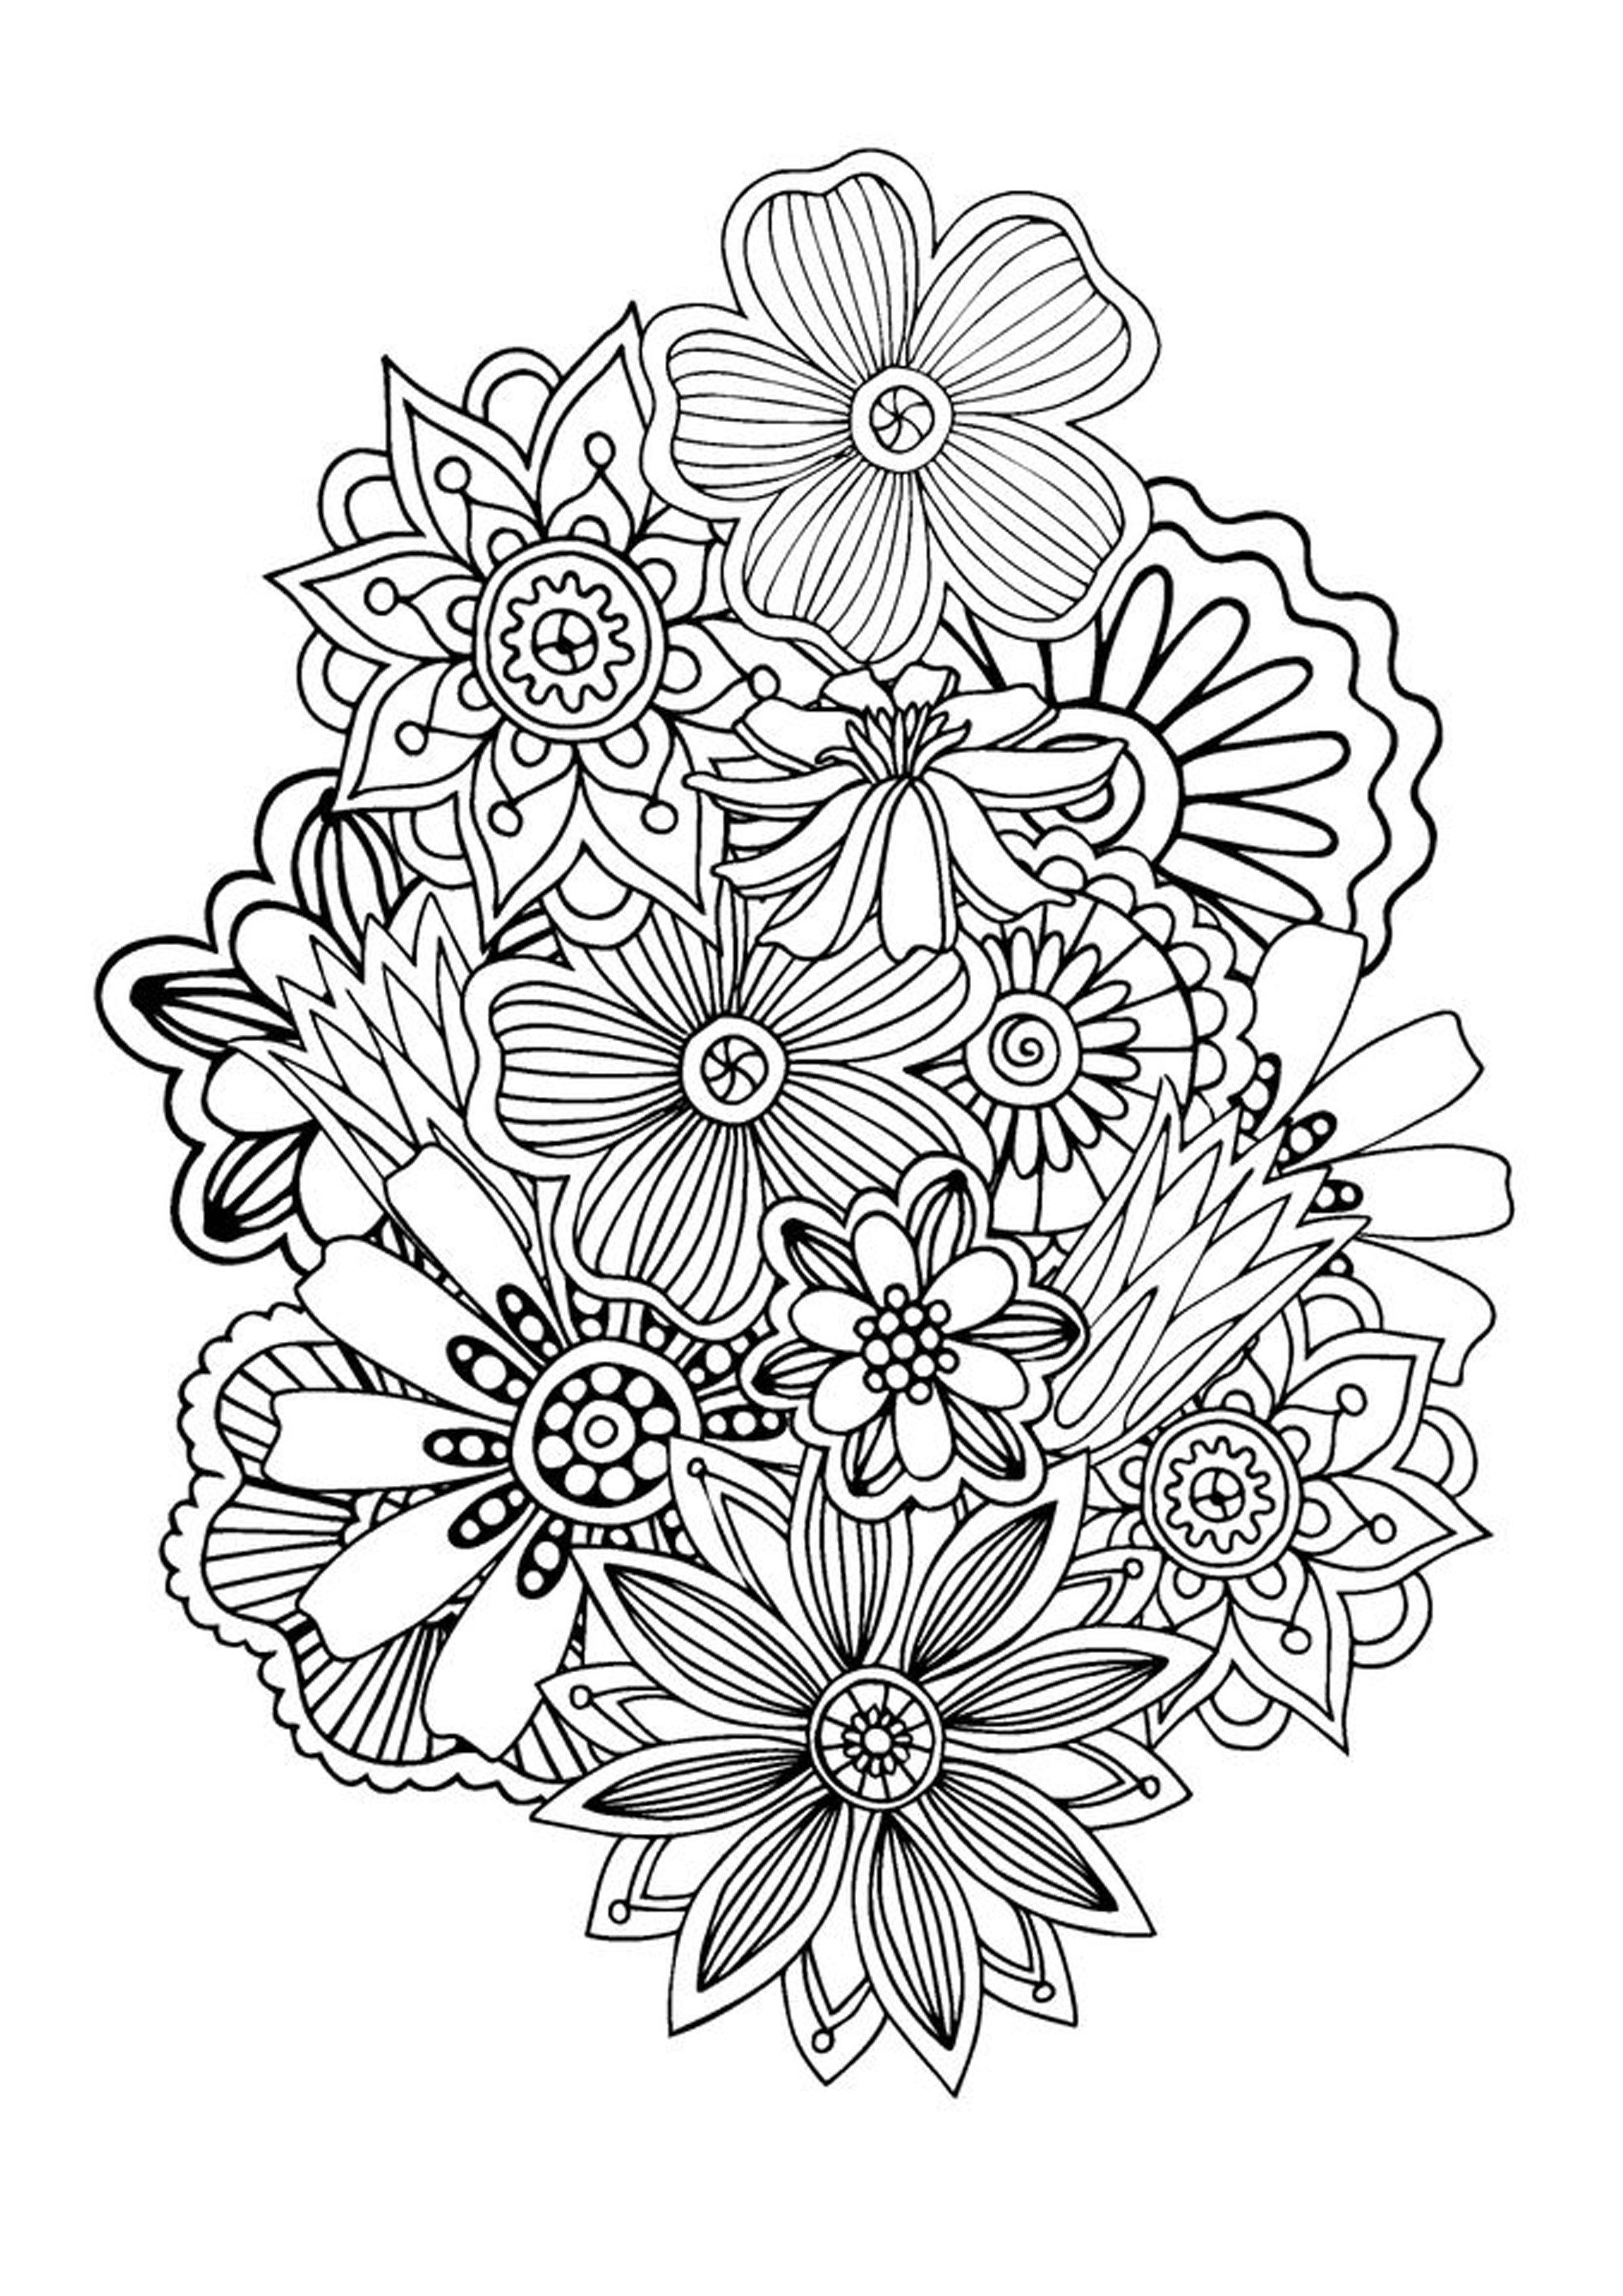 Zen antistress abstract pattern inspired Anti stress Adult Coloring